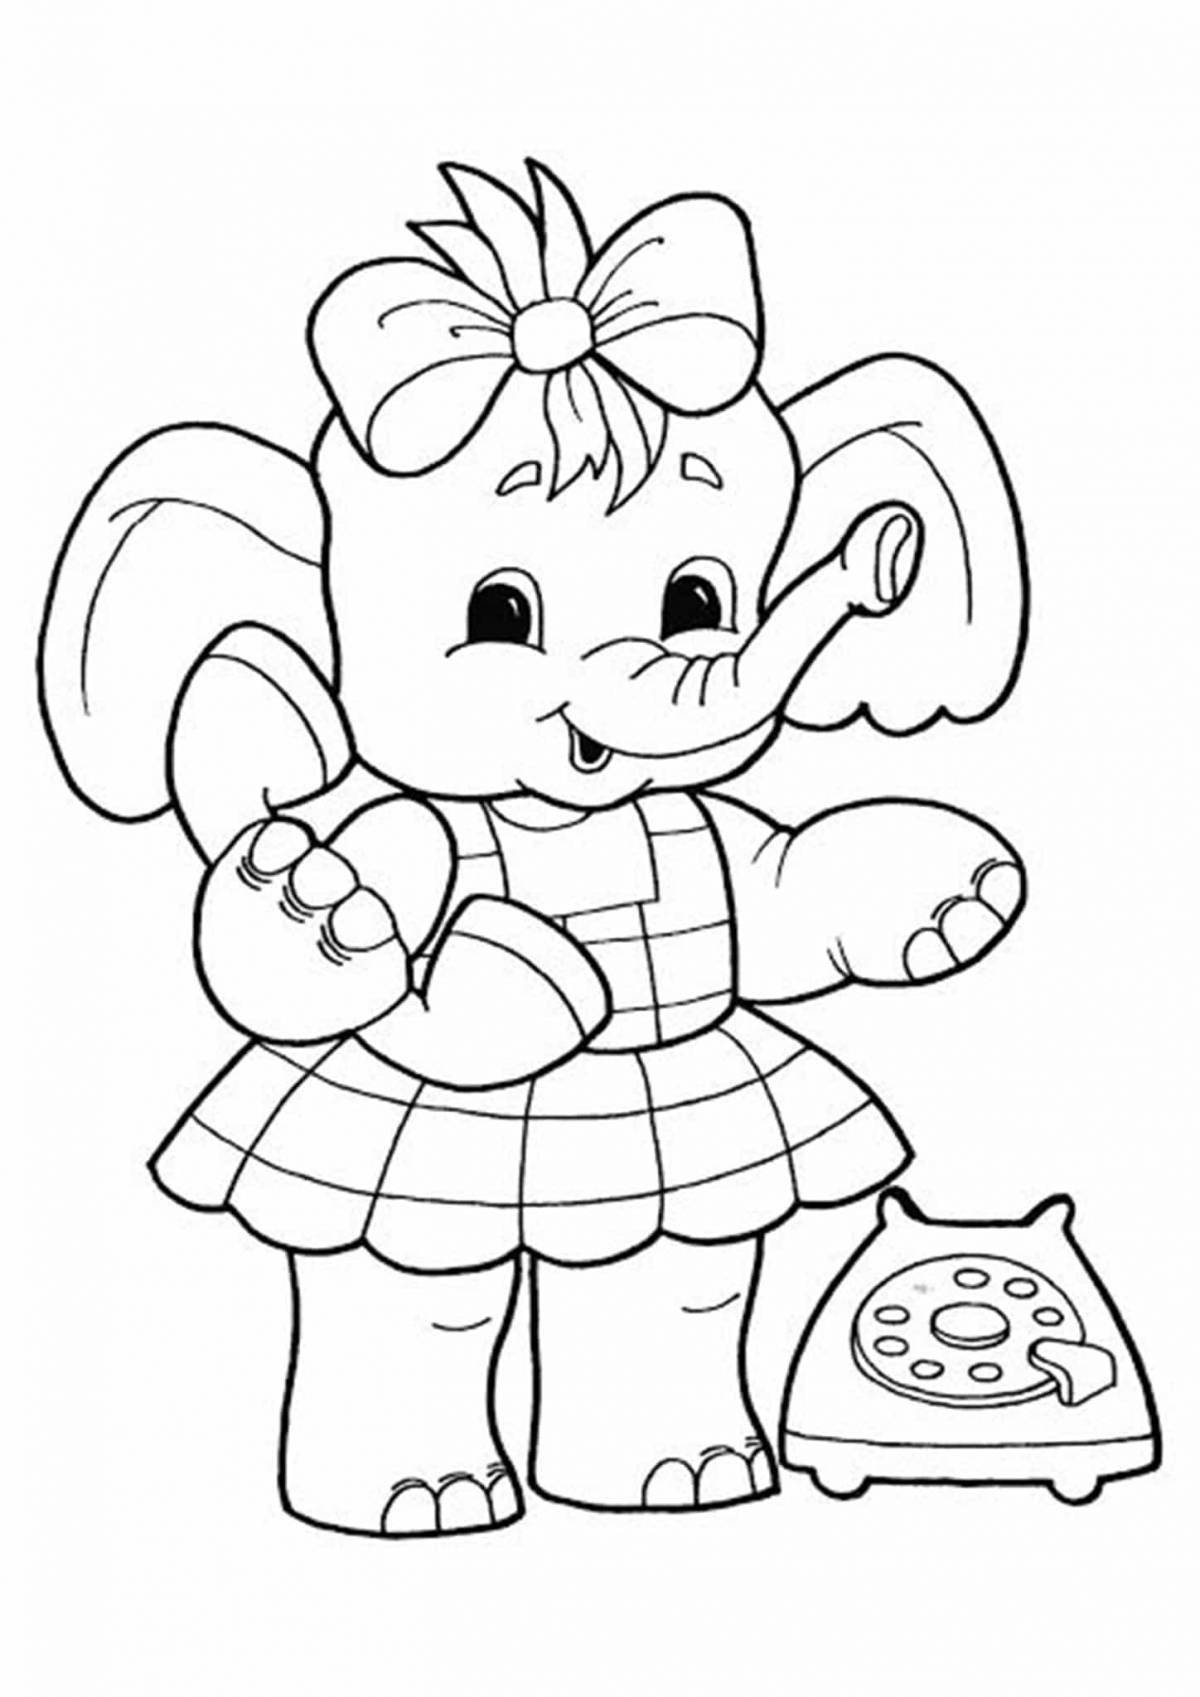 Sweet elephant coloring pages for kids